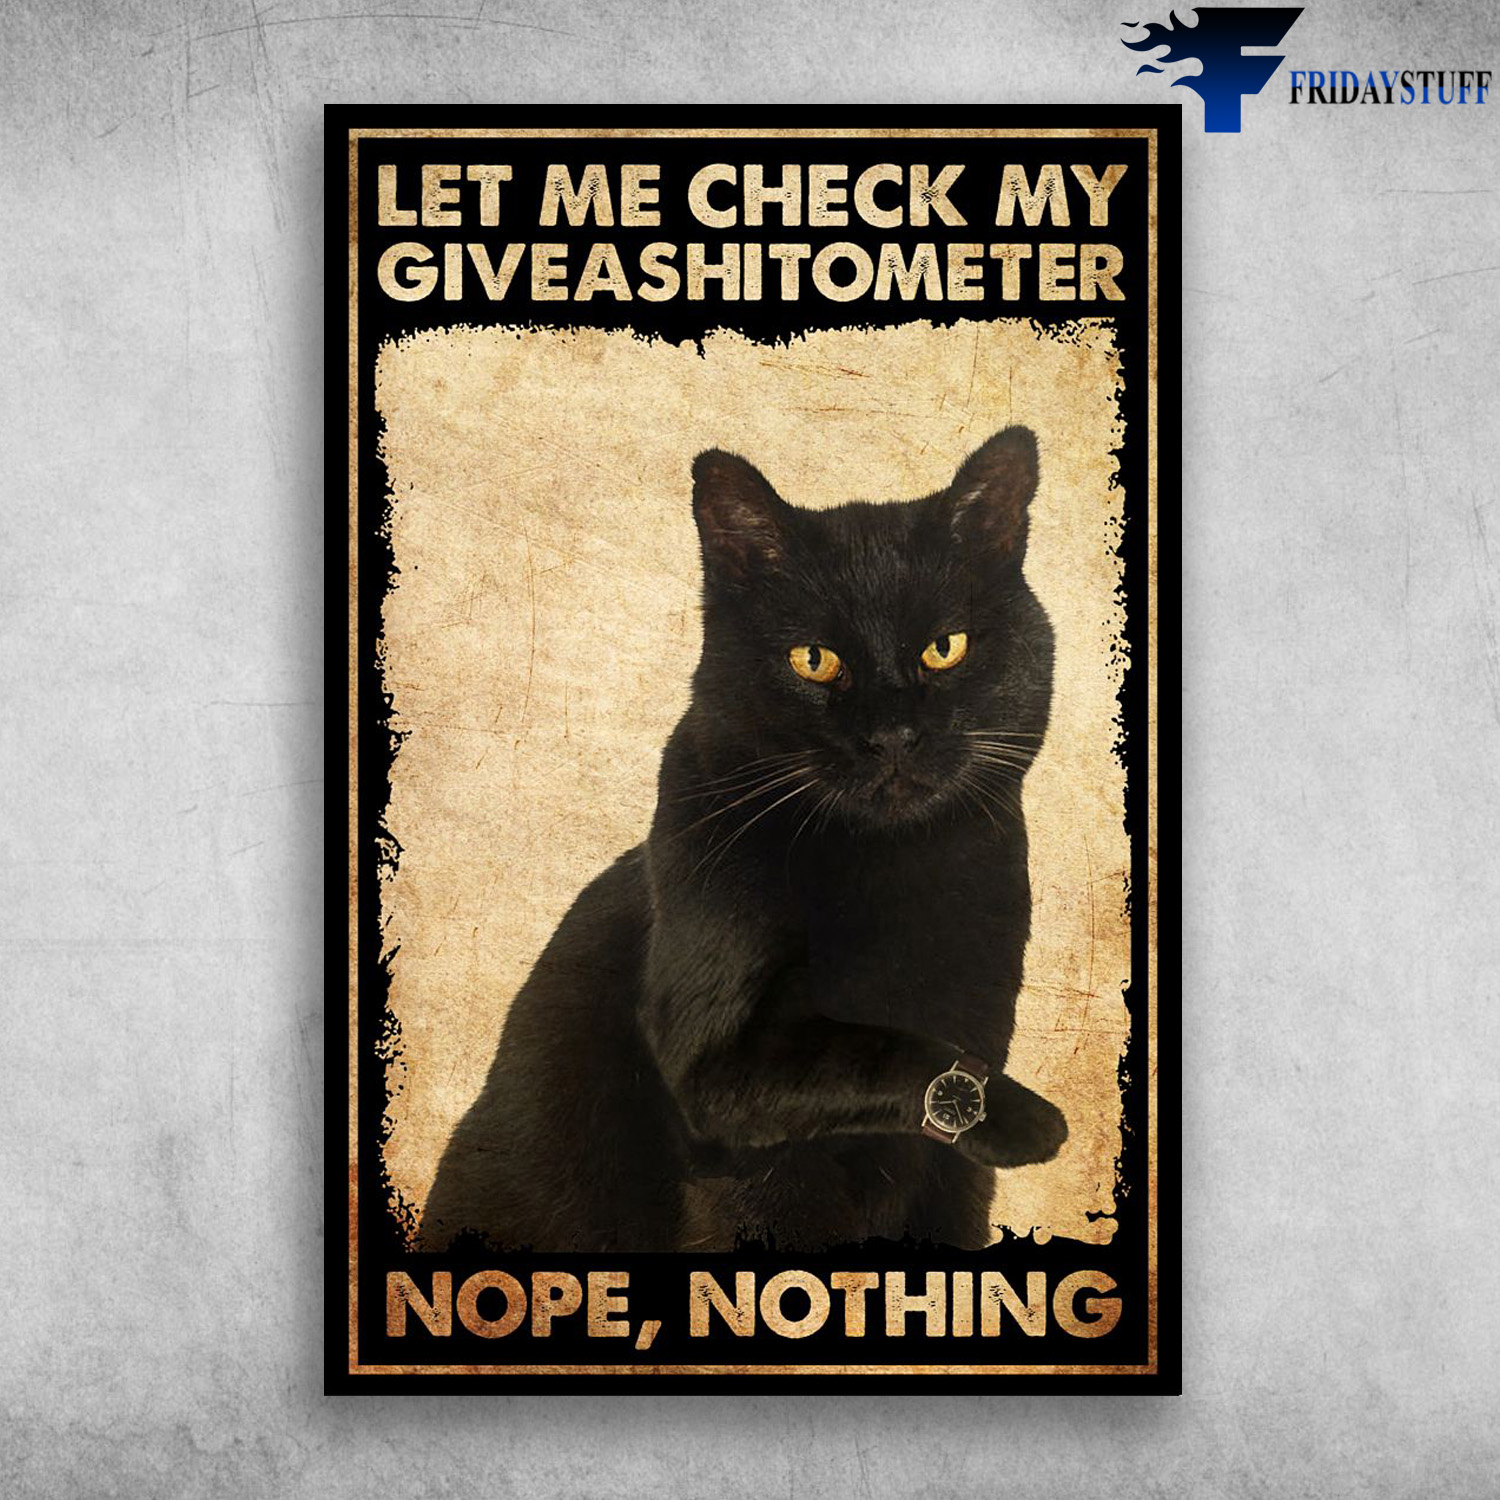 The Black Cat - Let Me Check My Giveashitometer, Nope, Nothing